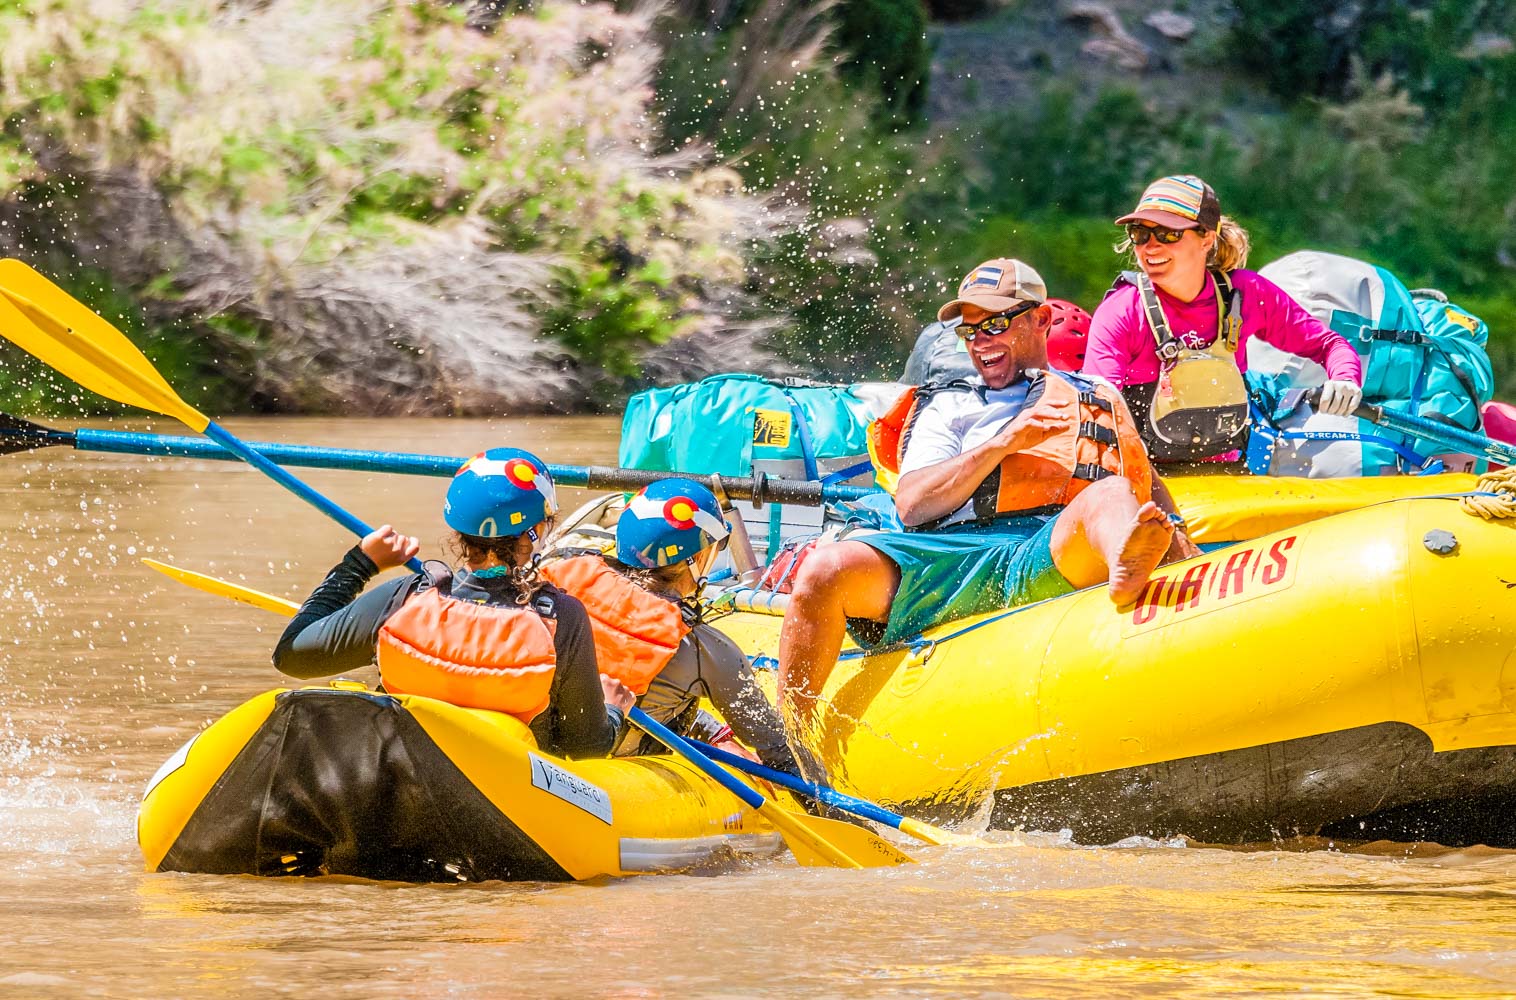 Why Everyone Needs to Go on a River Trip At Least Once in Their Life